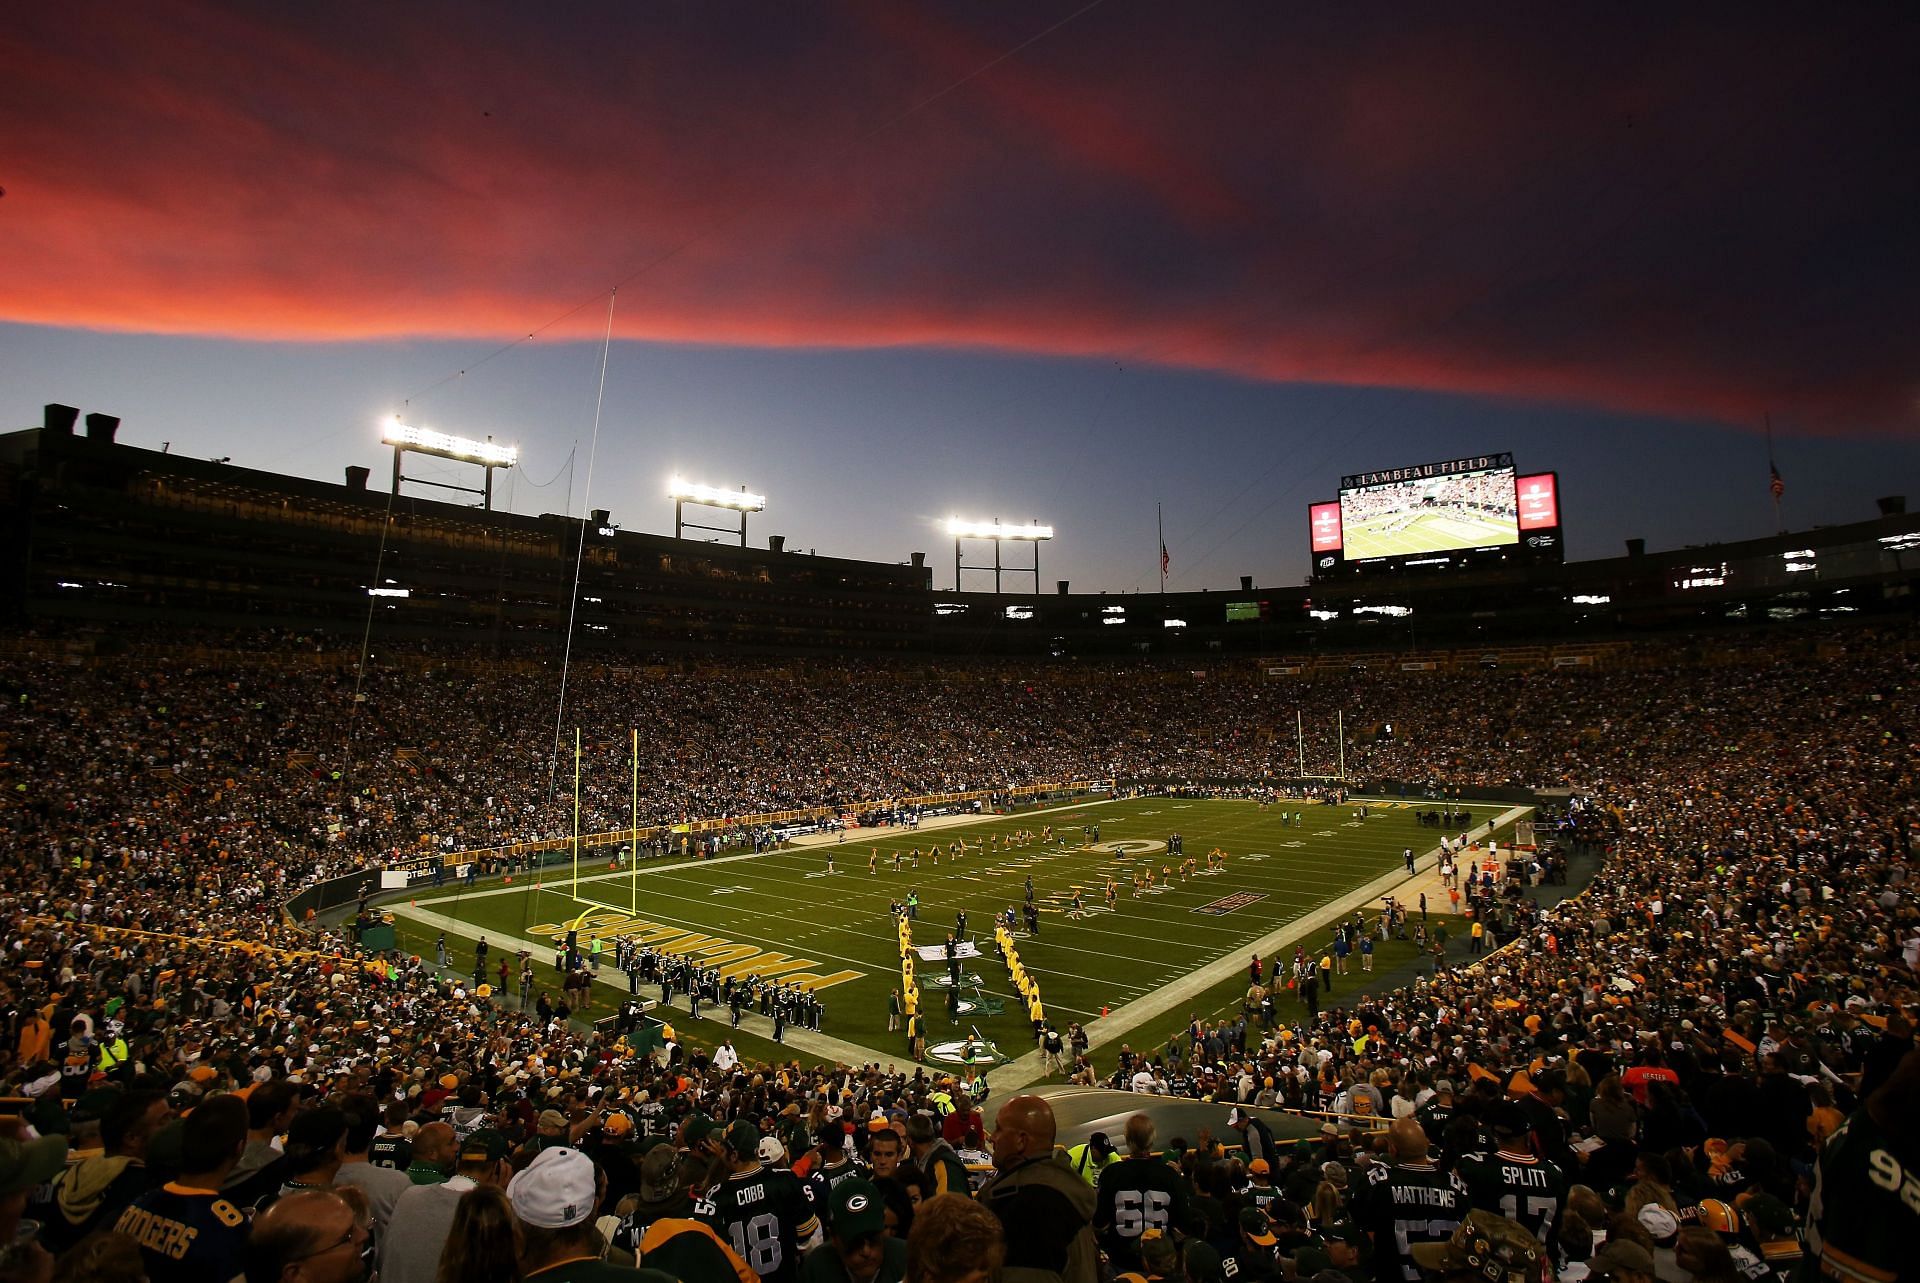 Will the Packers ever leave Lambeau Field?